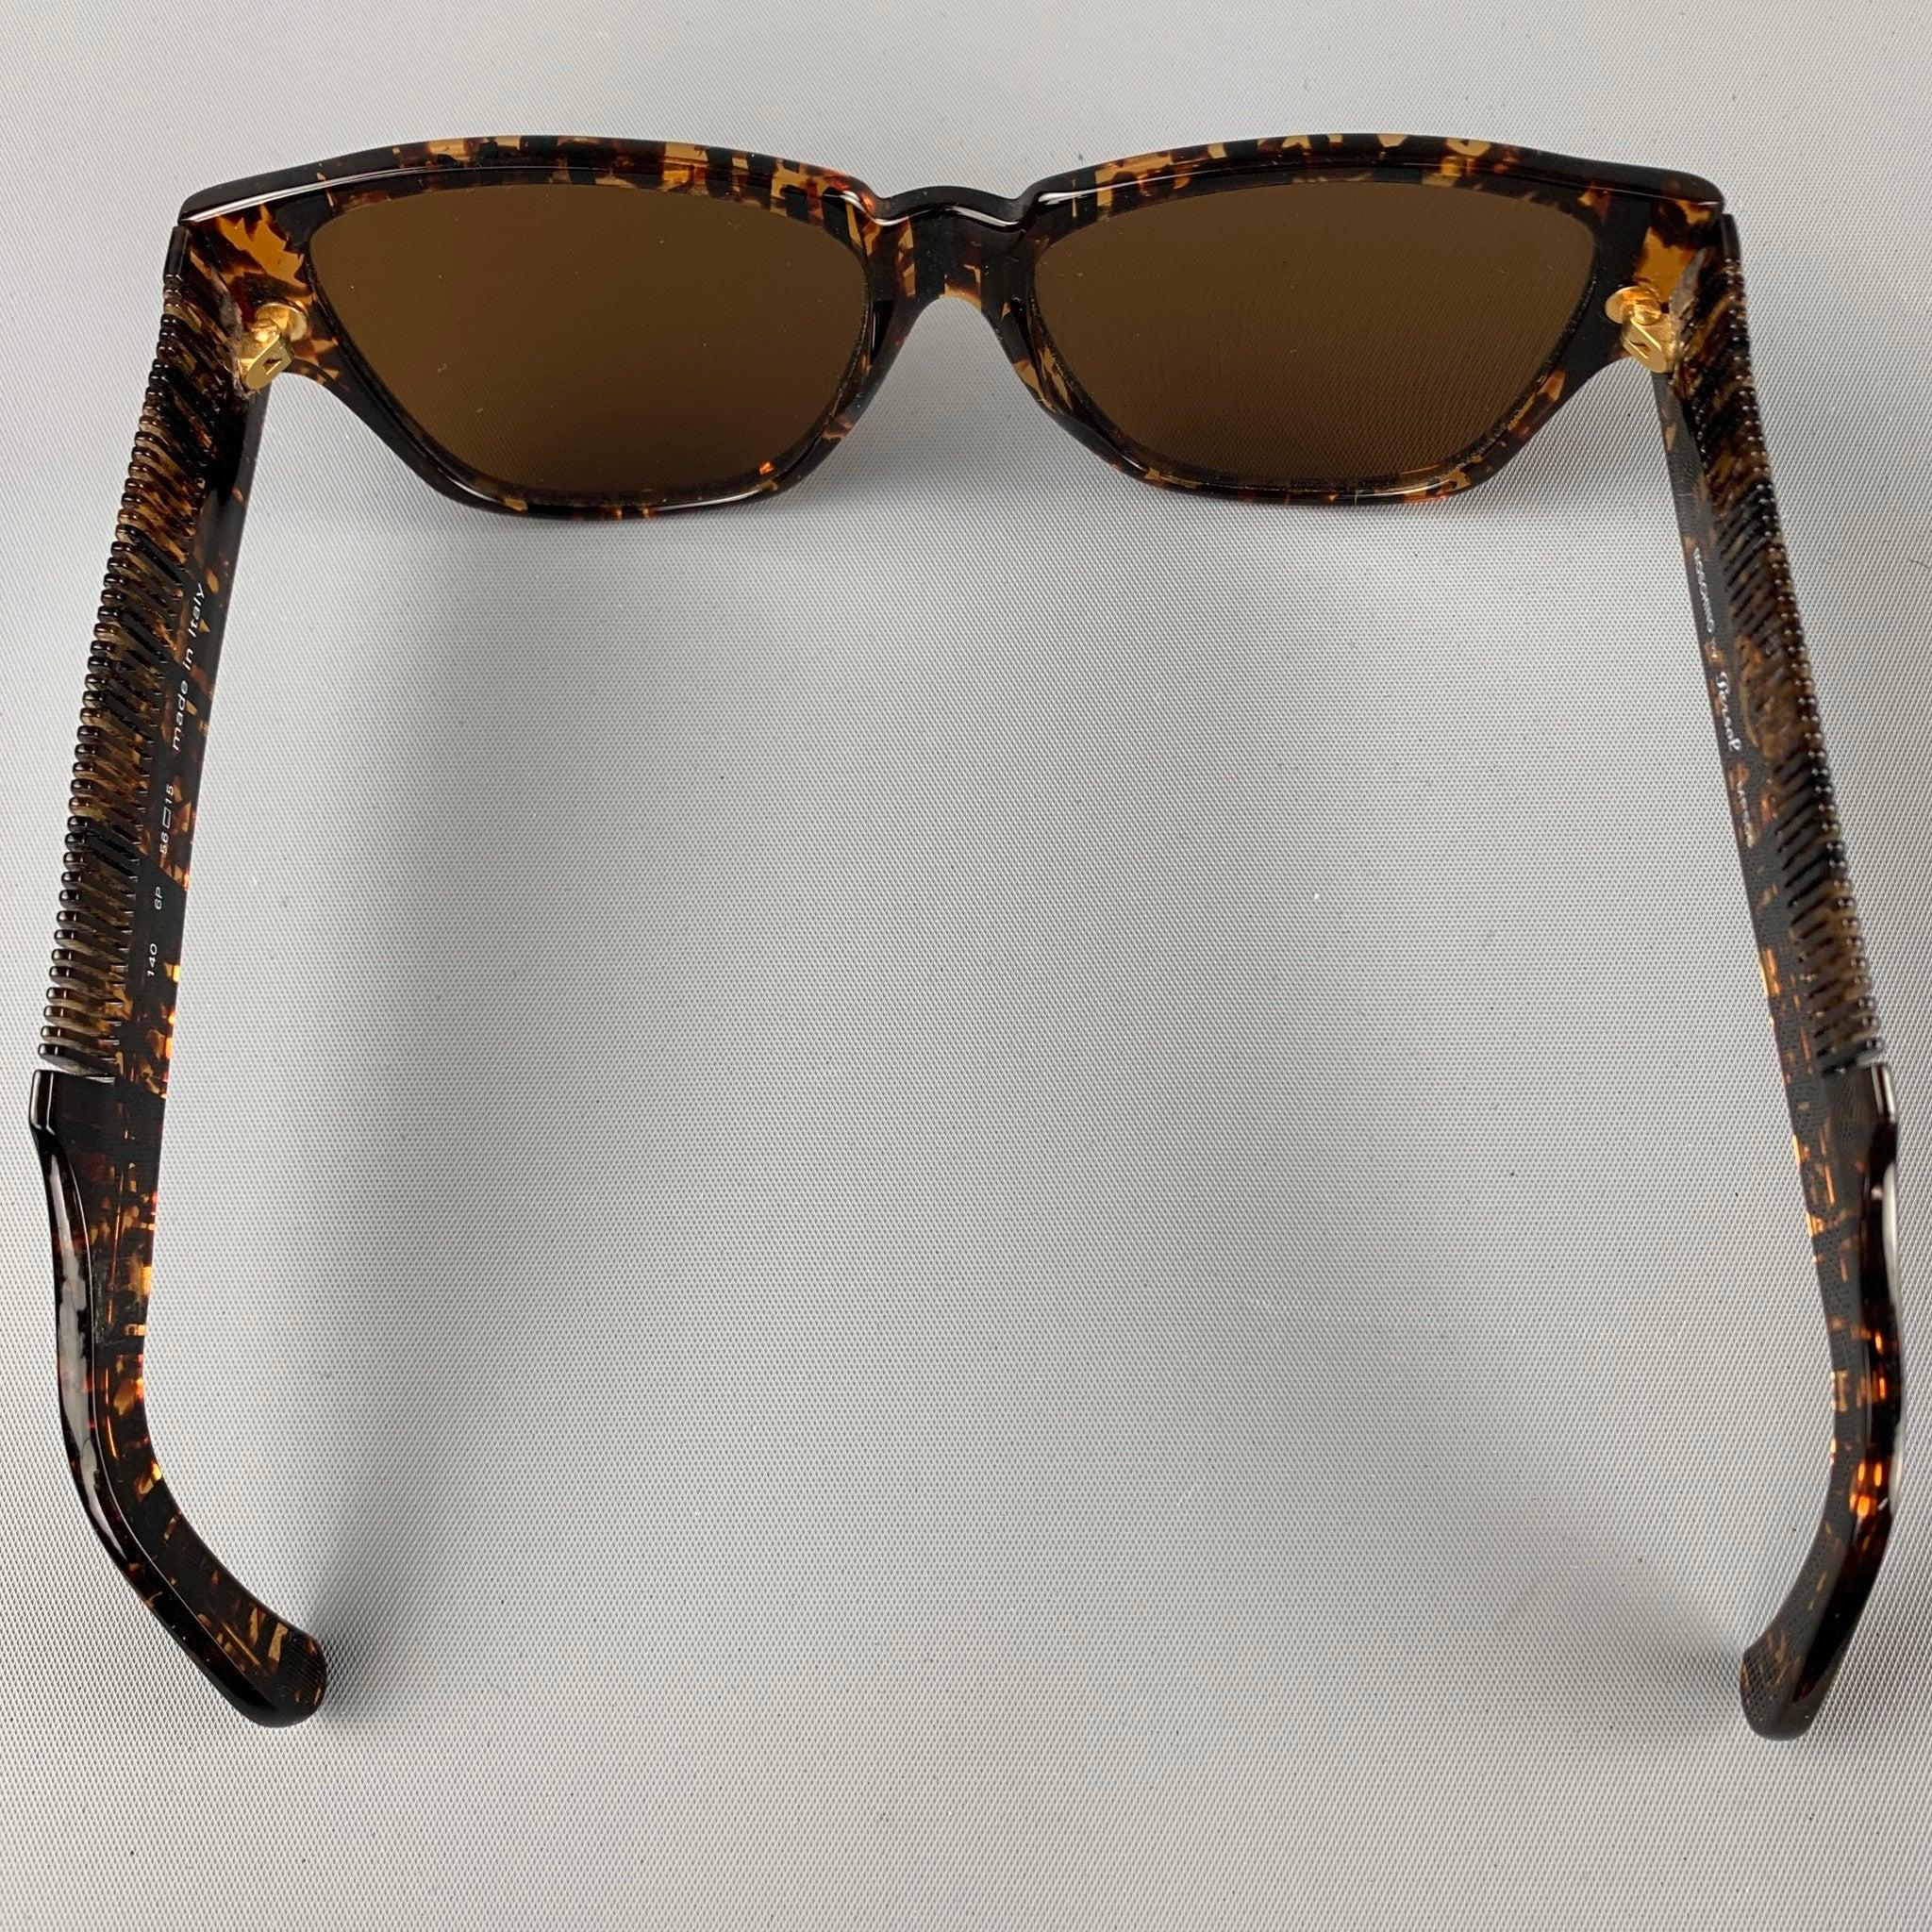 Vintage MOSCHINO by PERSOL Tortoiseshell Acetate Brown Sunglasses In Good Condition For Sale In San Francisco, CA